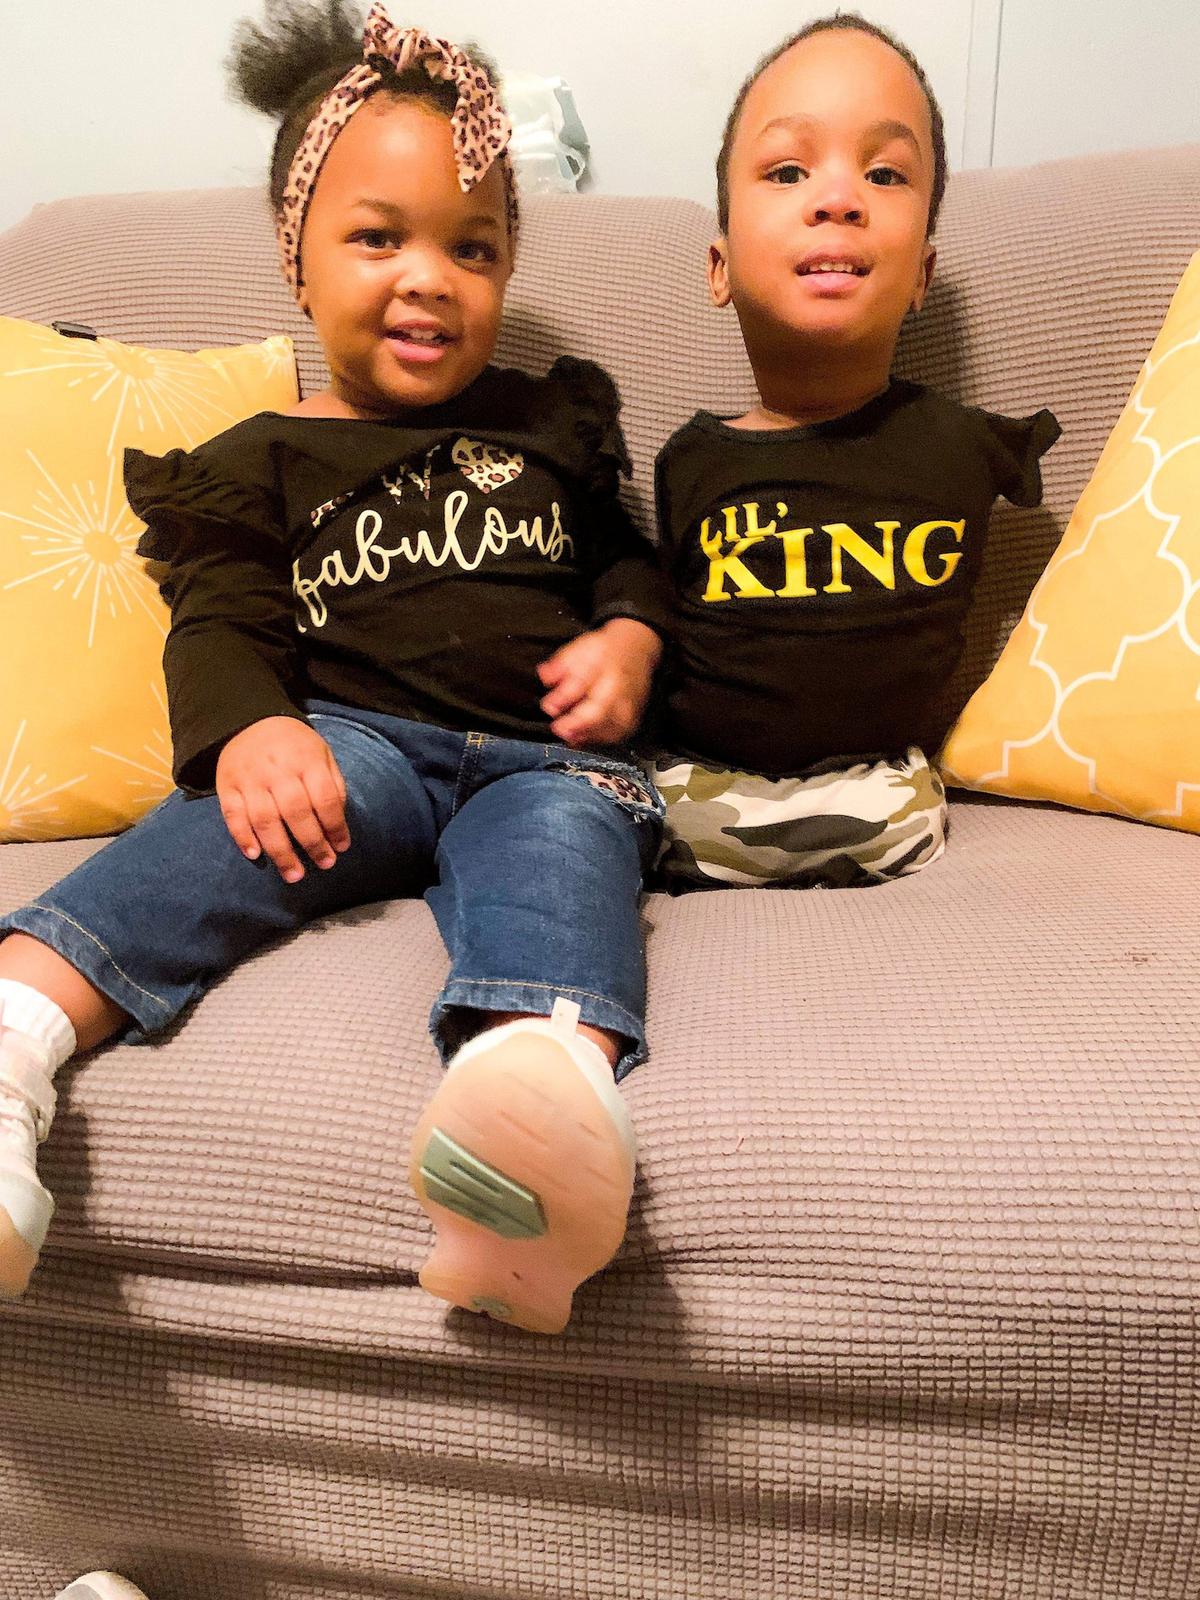 Rondell Wilson Jr. (RJ), now 3, from Florence, South Carolina, next to his younger sister, Jaslynn Wilson. (SWNS)